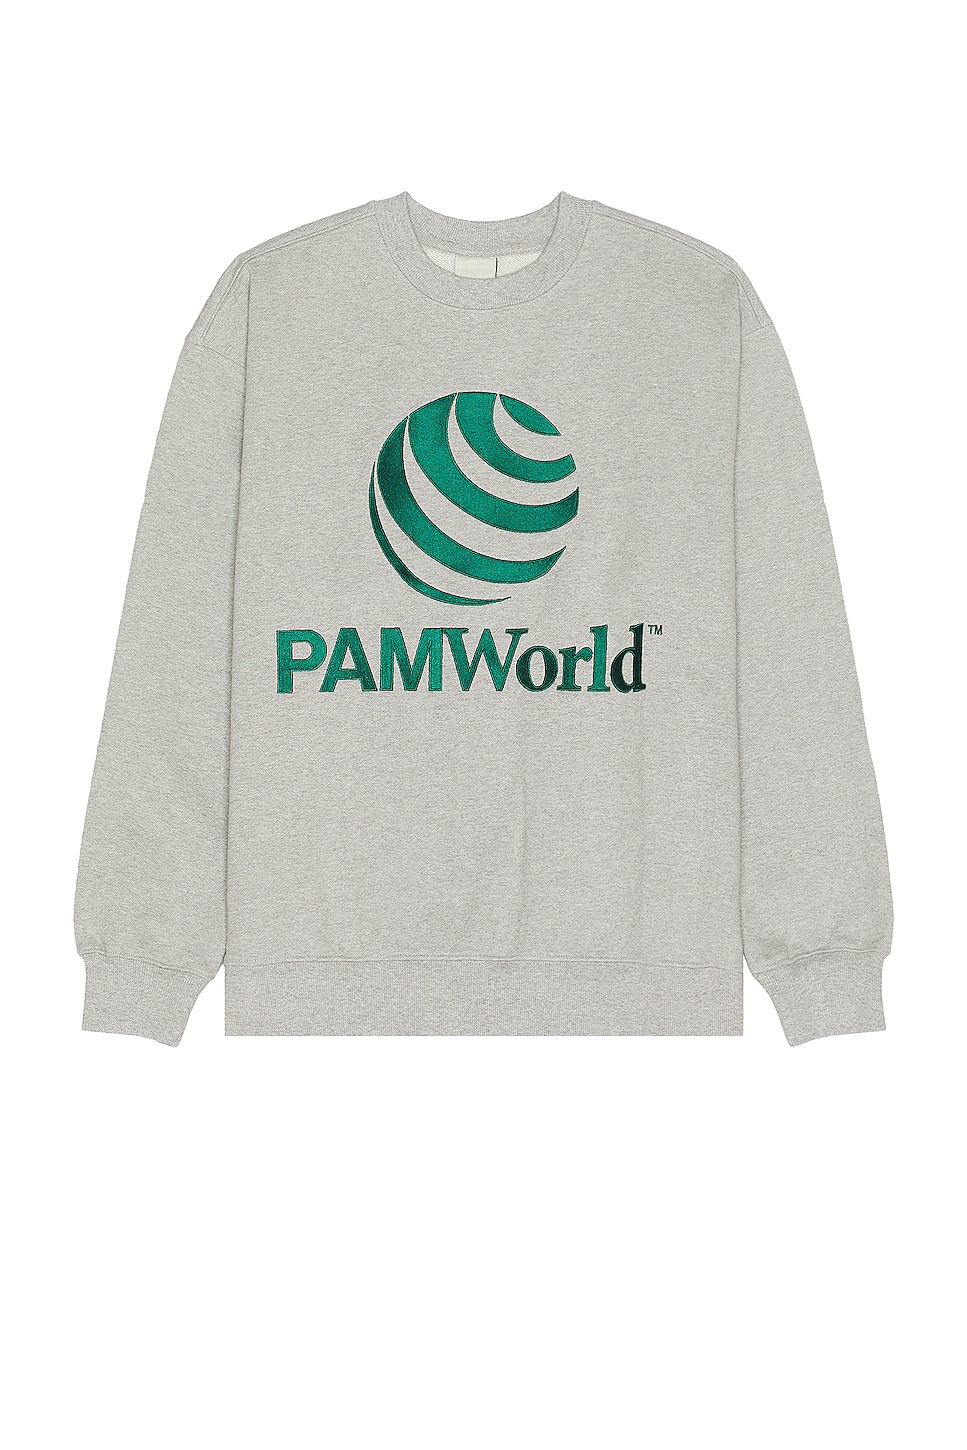 Image 1 of P.A.M. Perks and Mini P.a.m. World Crew Neck Sweater in Grey Marle